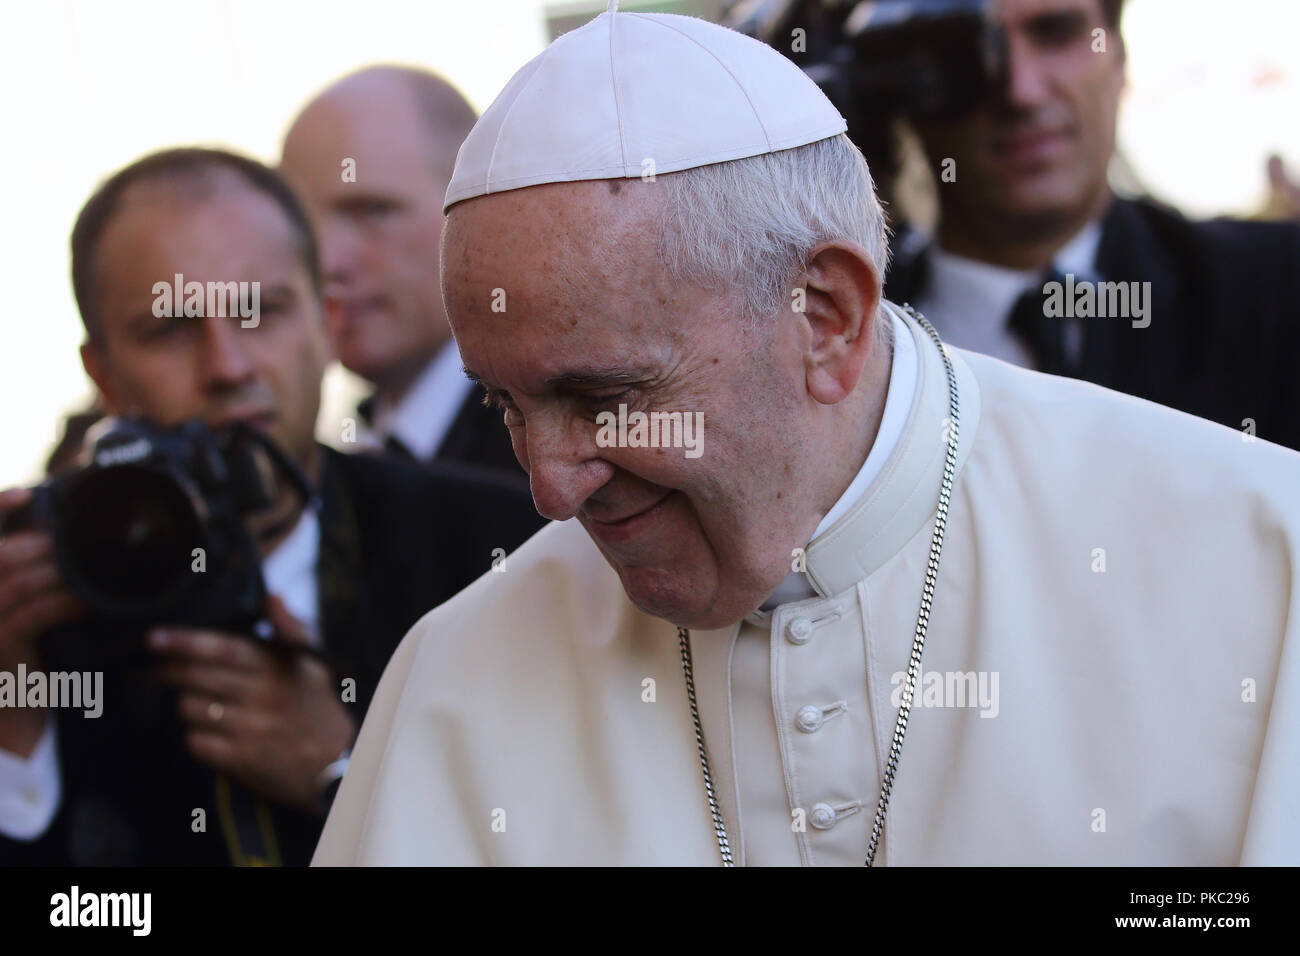 September 12, 2018 - Vatican City (Holy See) POPE FRANCIS during his weekly General Audience in St. Peter's Square at the Vatican. Credit: Evandro Inetti/ZUMA Wire/Alamy Live News Stock Photo